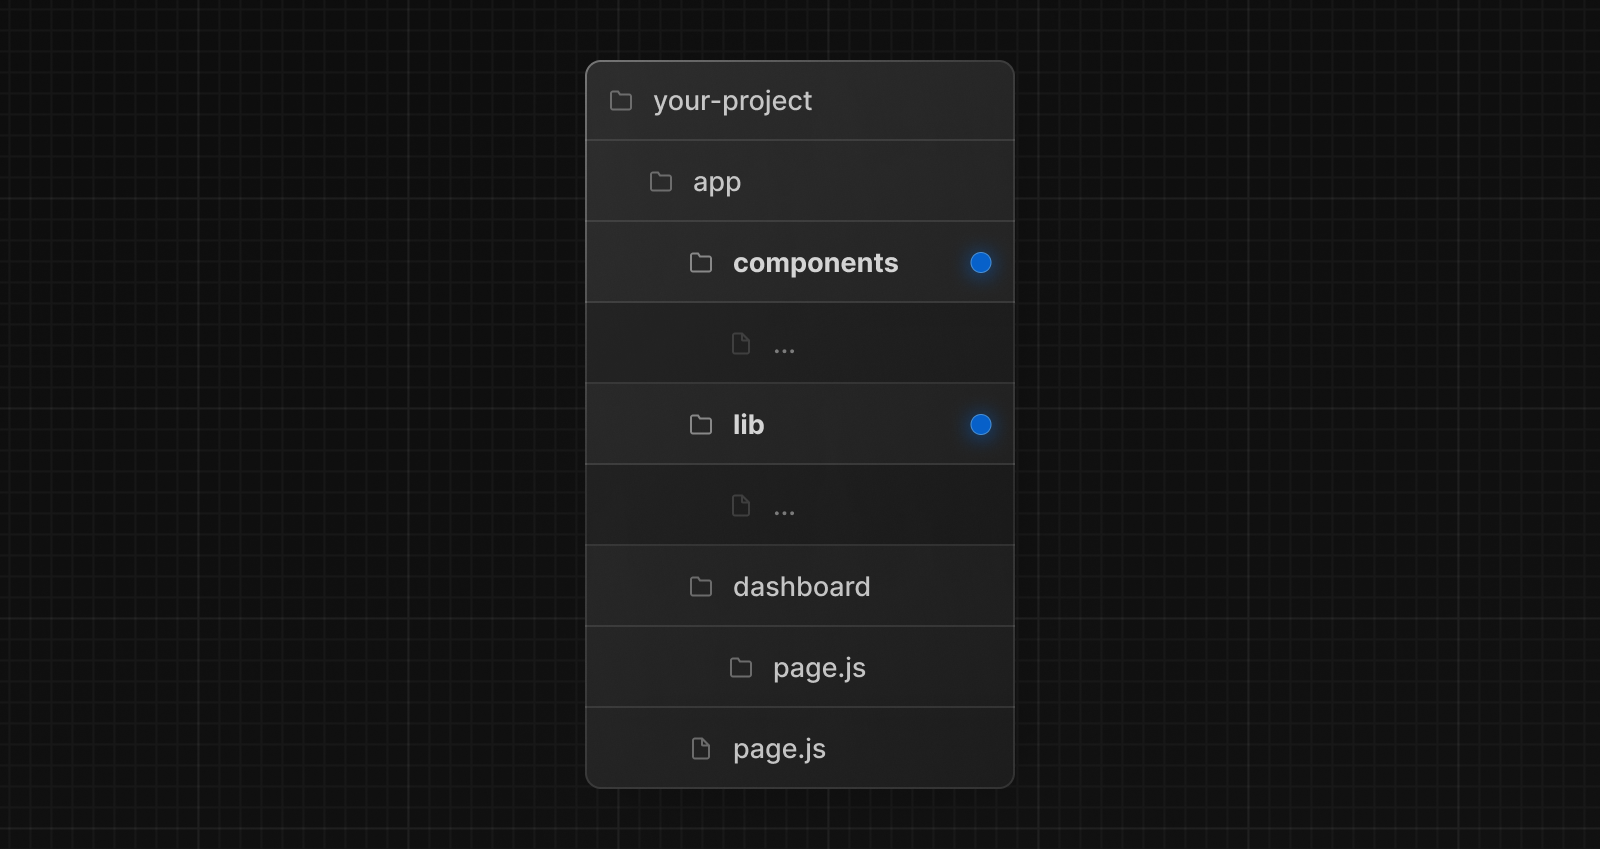 An example folder structure with project files inside app